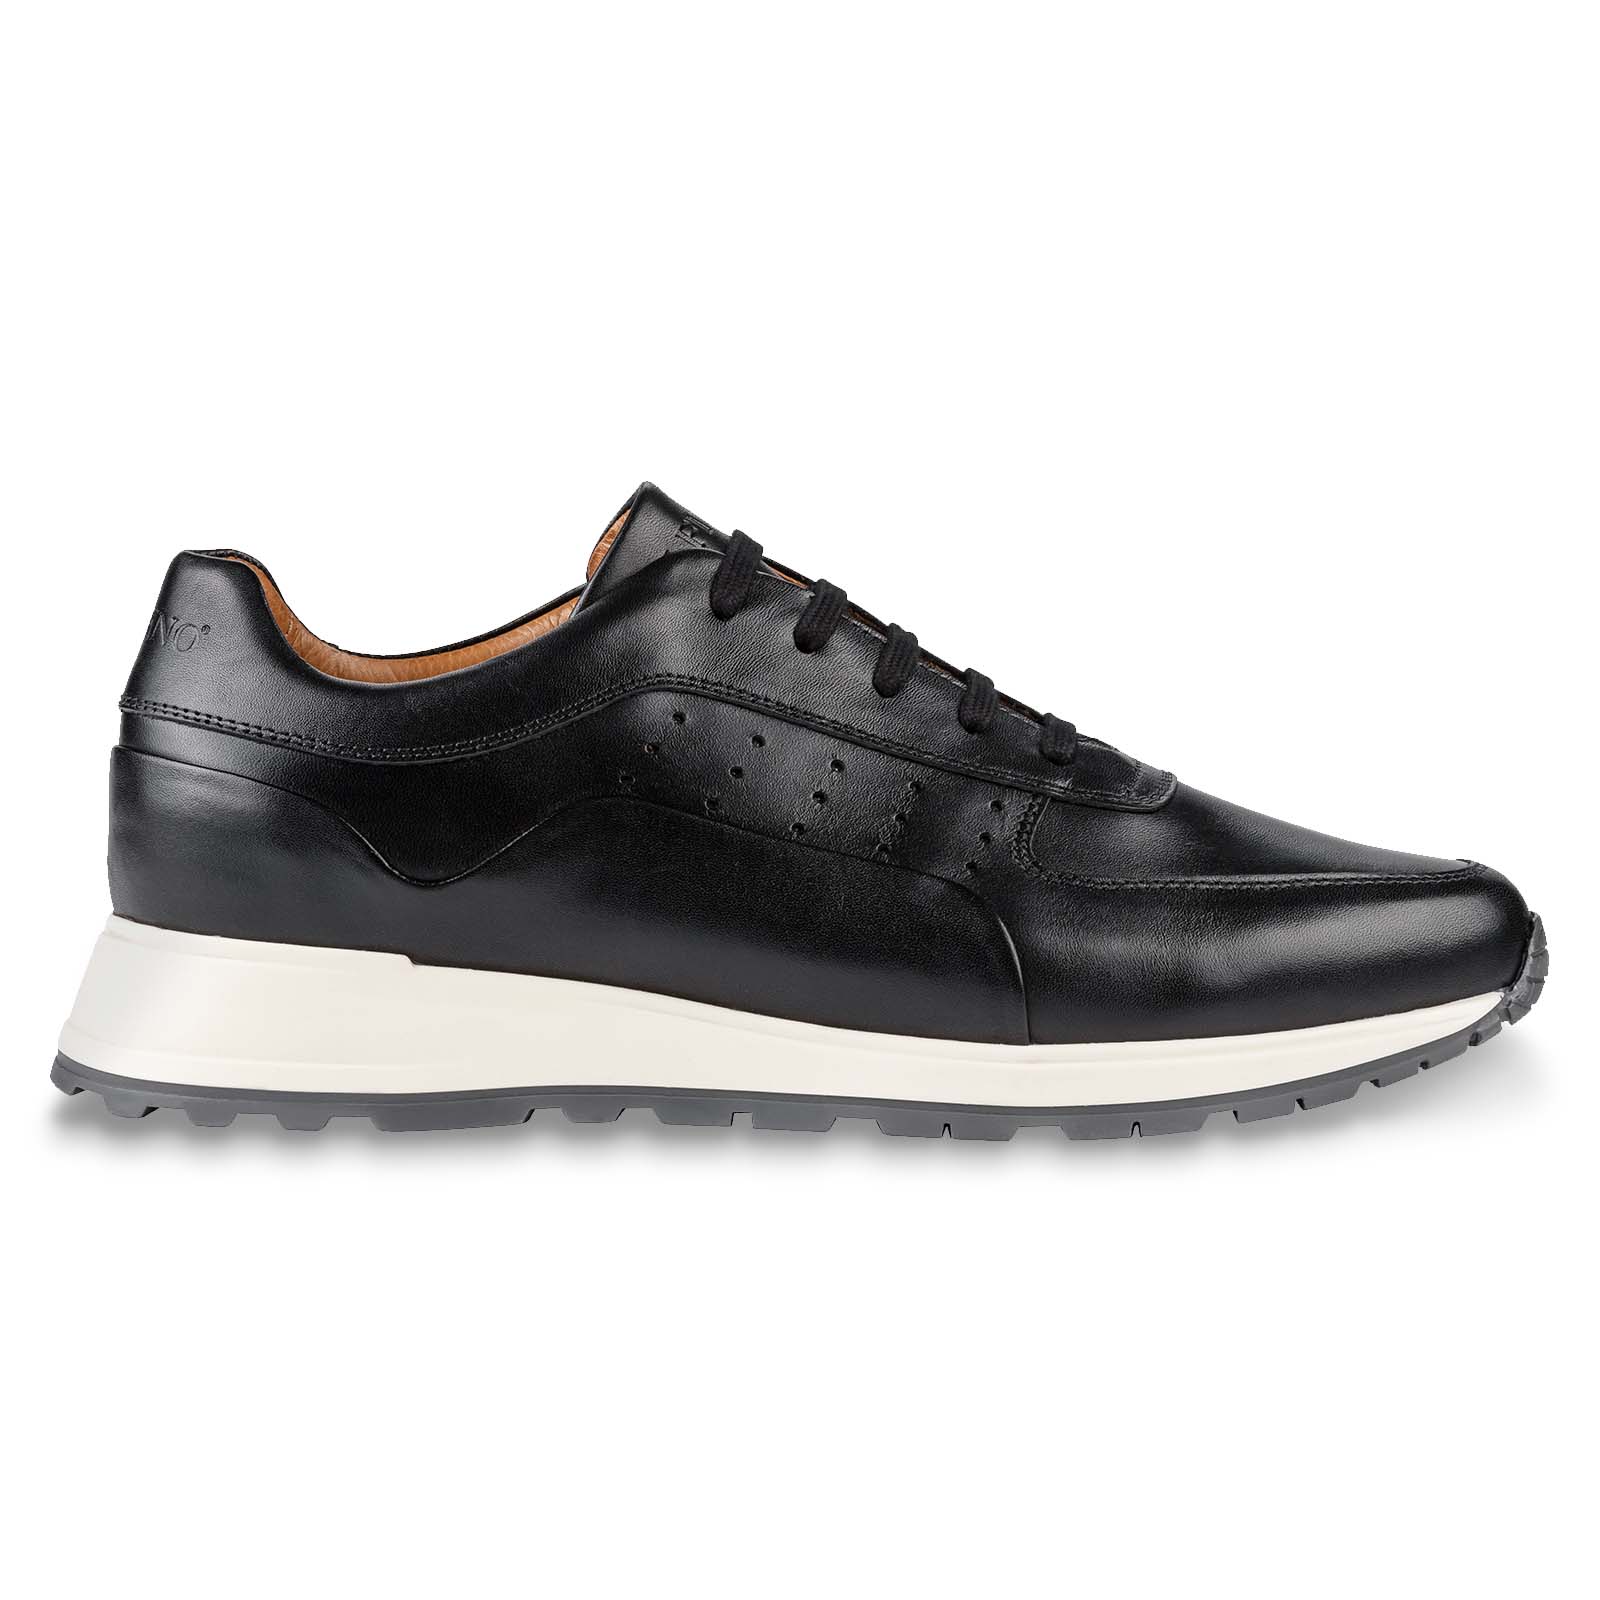 Men's golf shoes with a sporty touch 